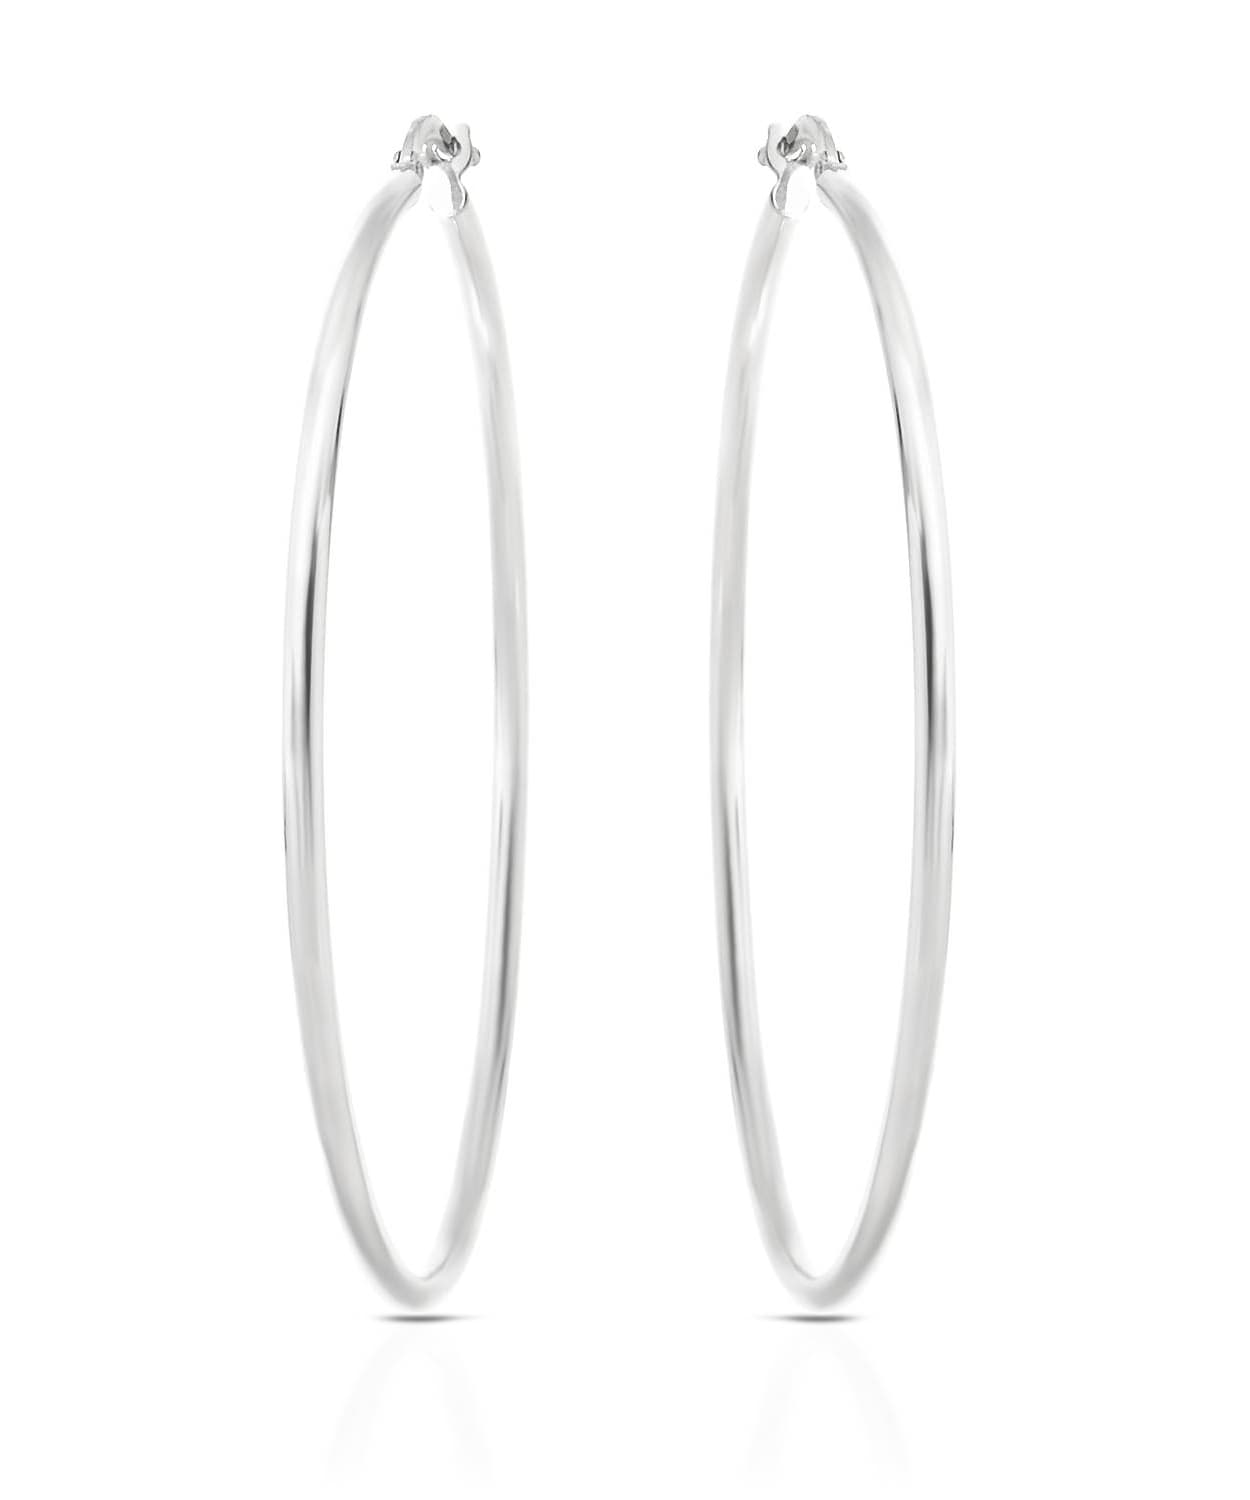 55mm Large 14k White Gold Thin Hoop Earrings View 1